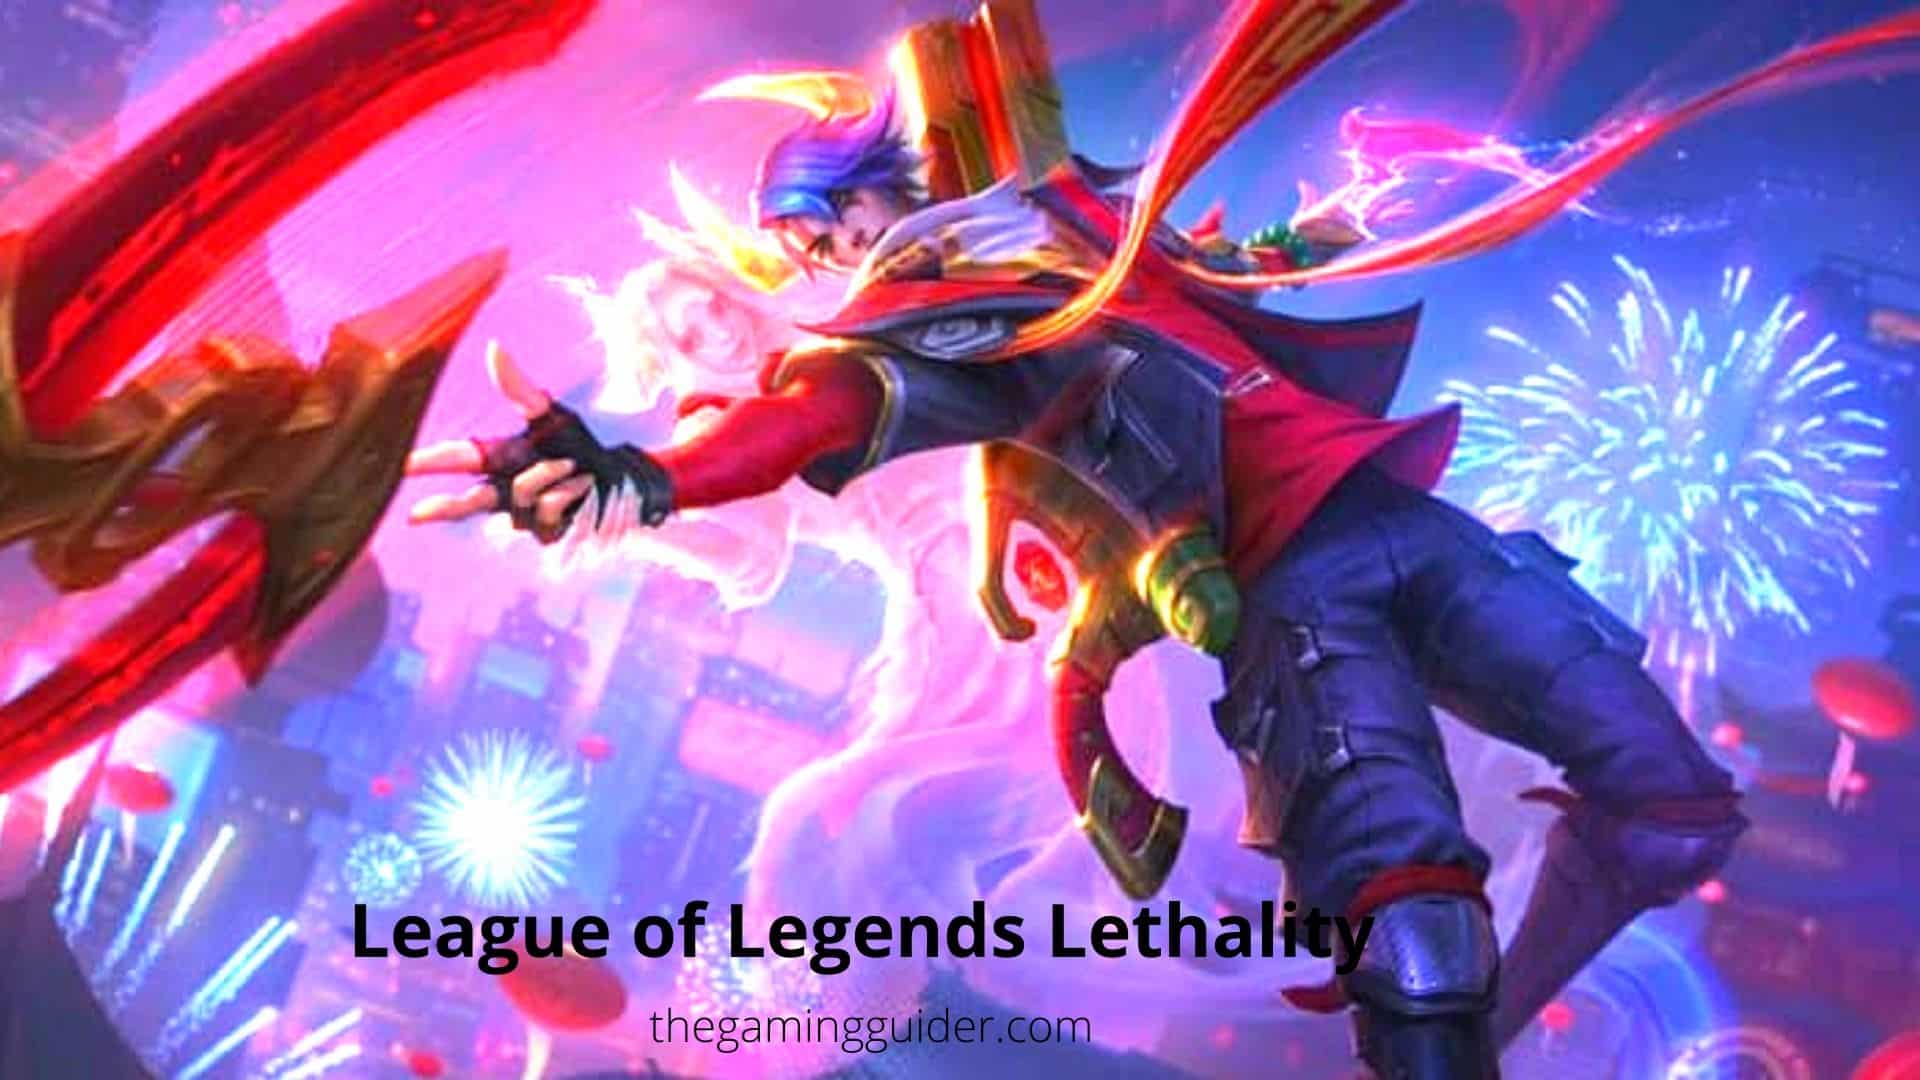 League of Legends Lethality -the gaming guider